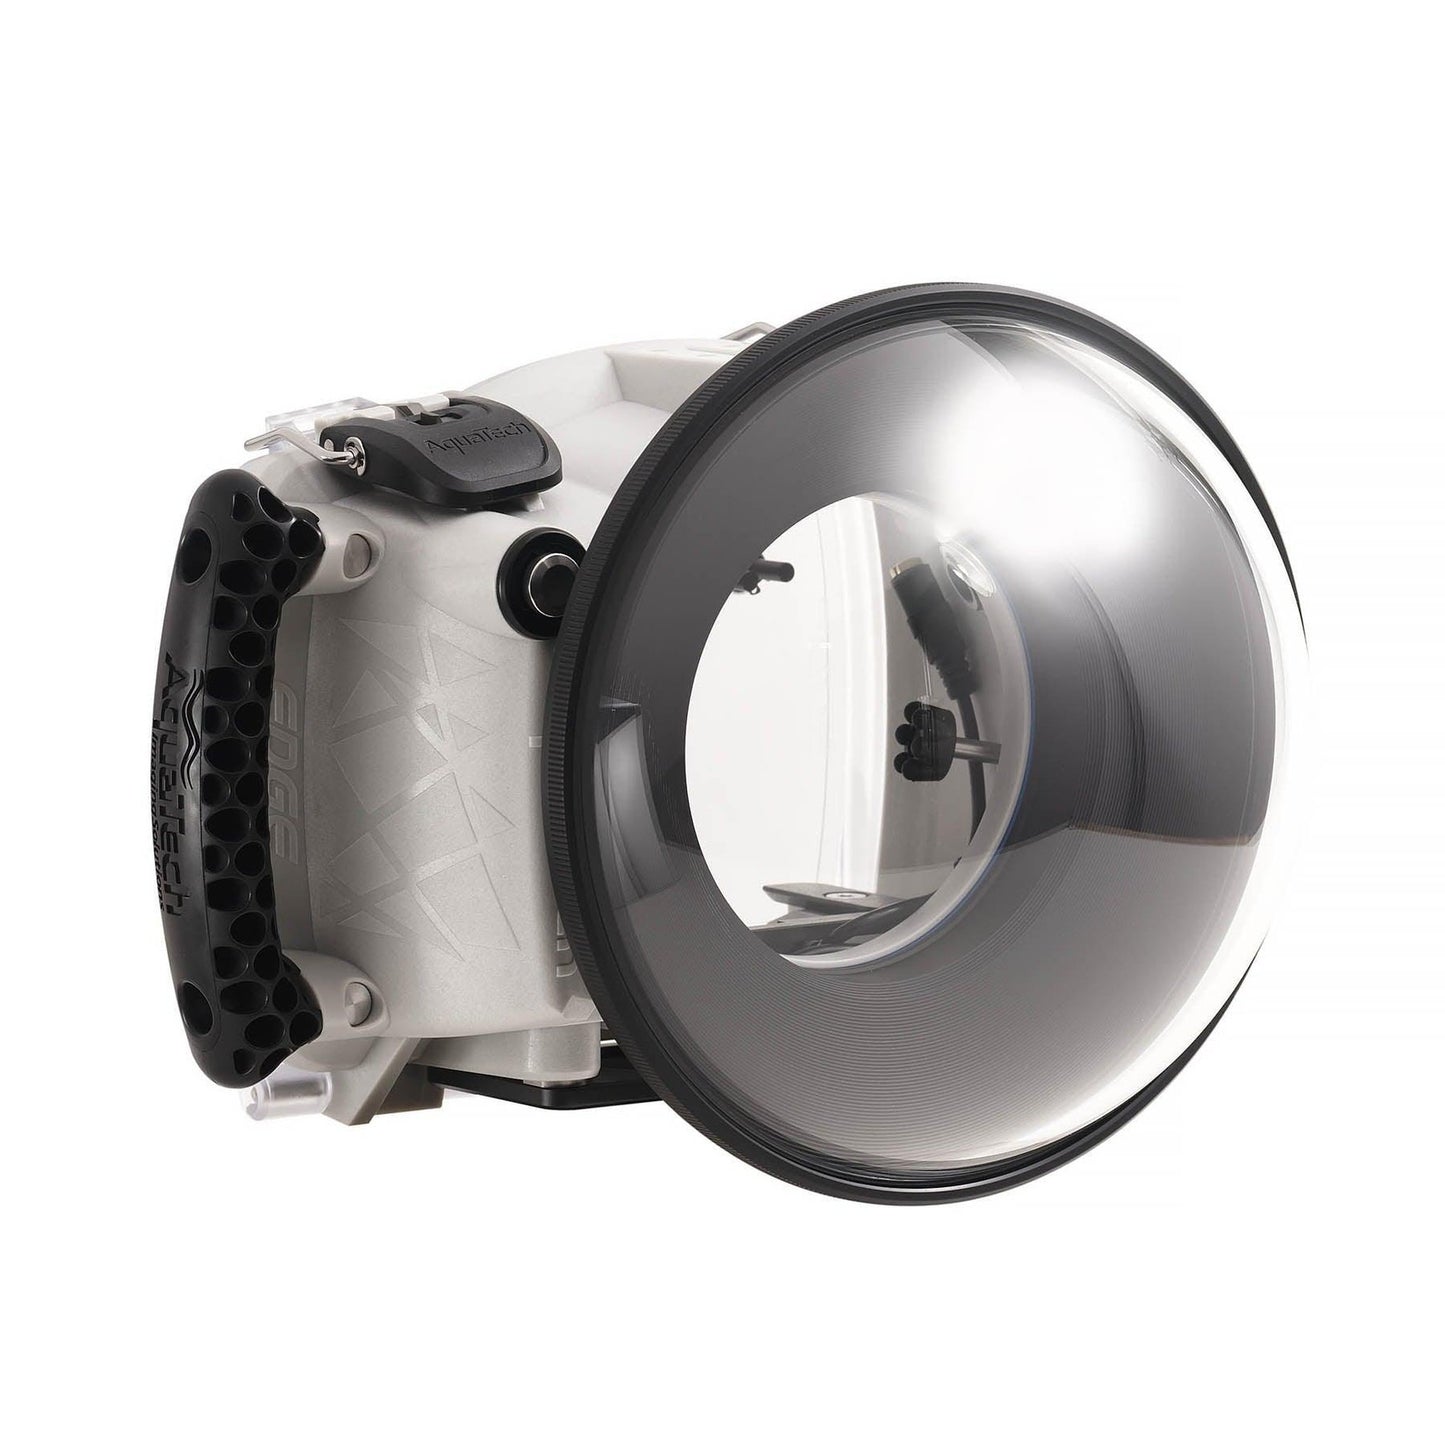 PD-100 Dome Lens Port - Clearance